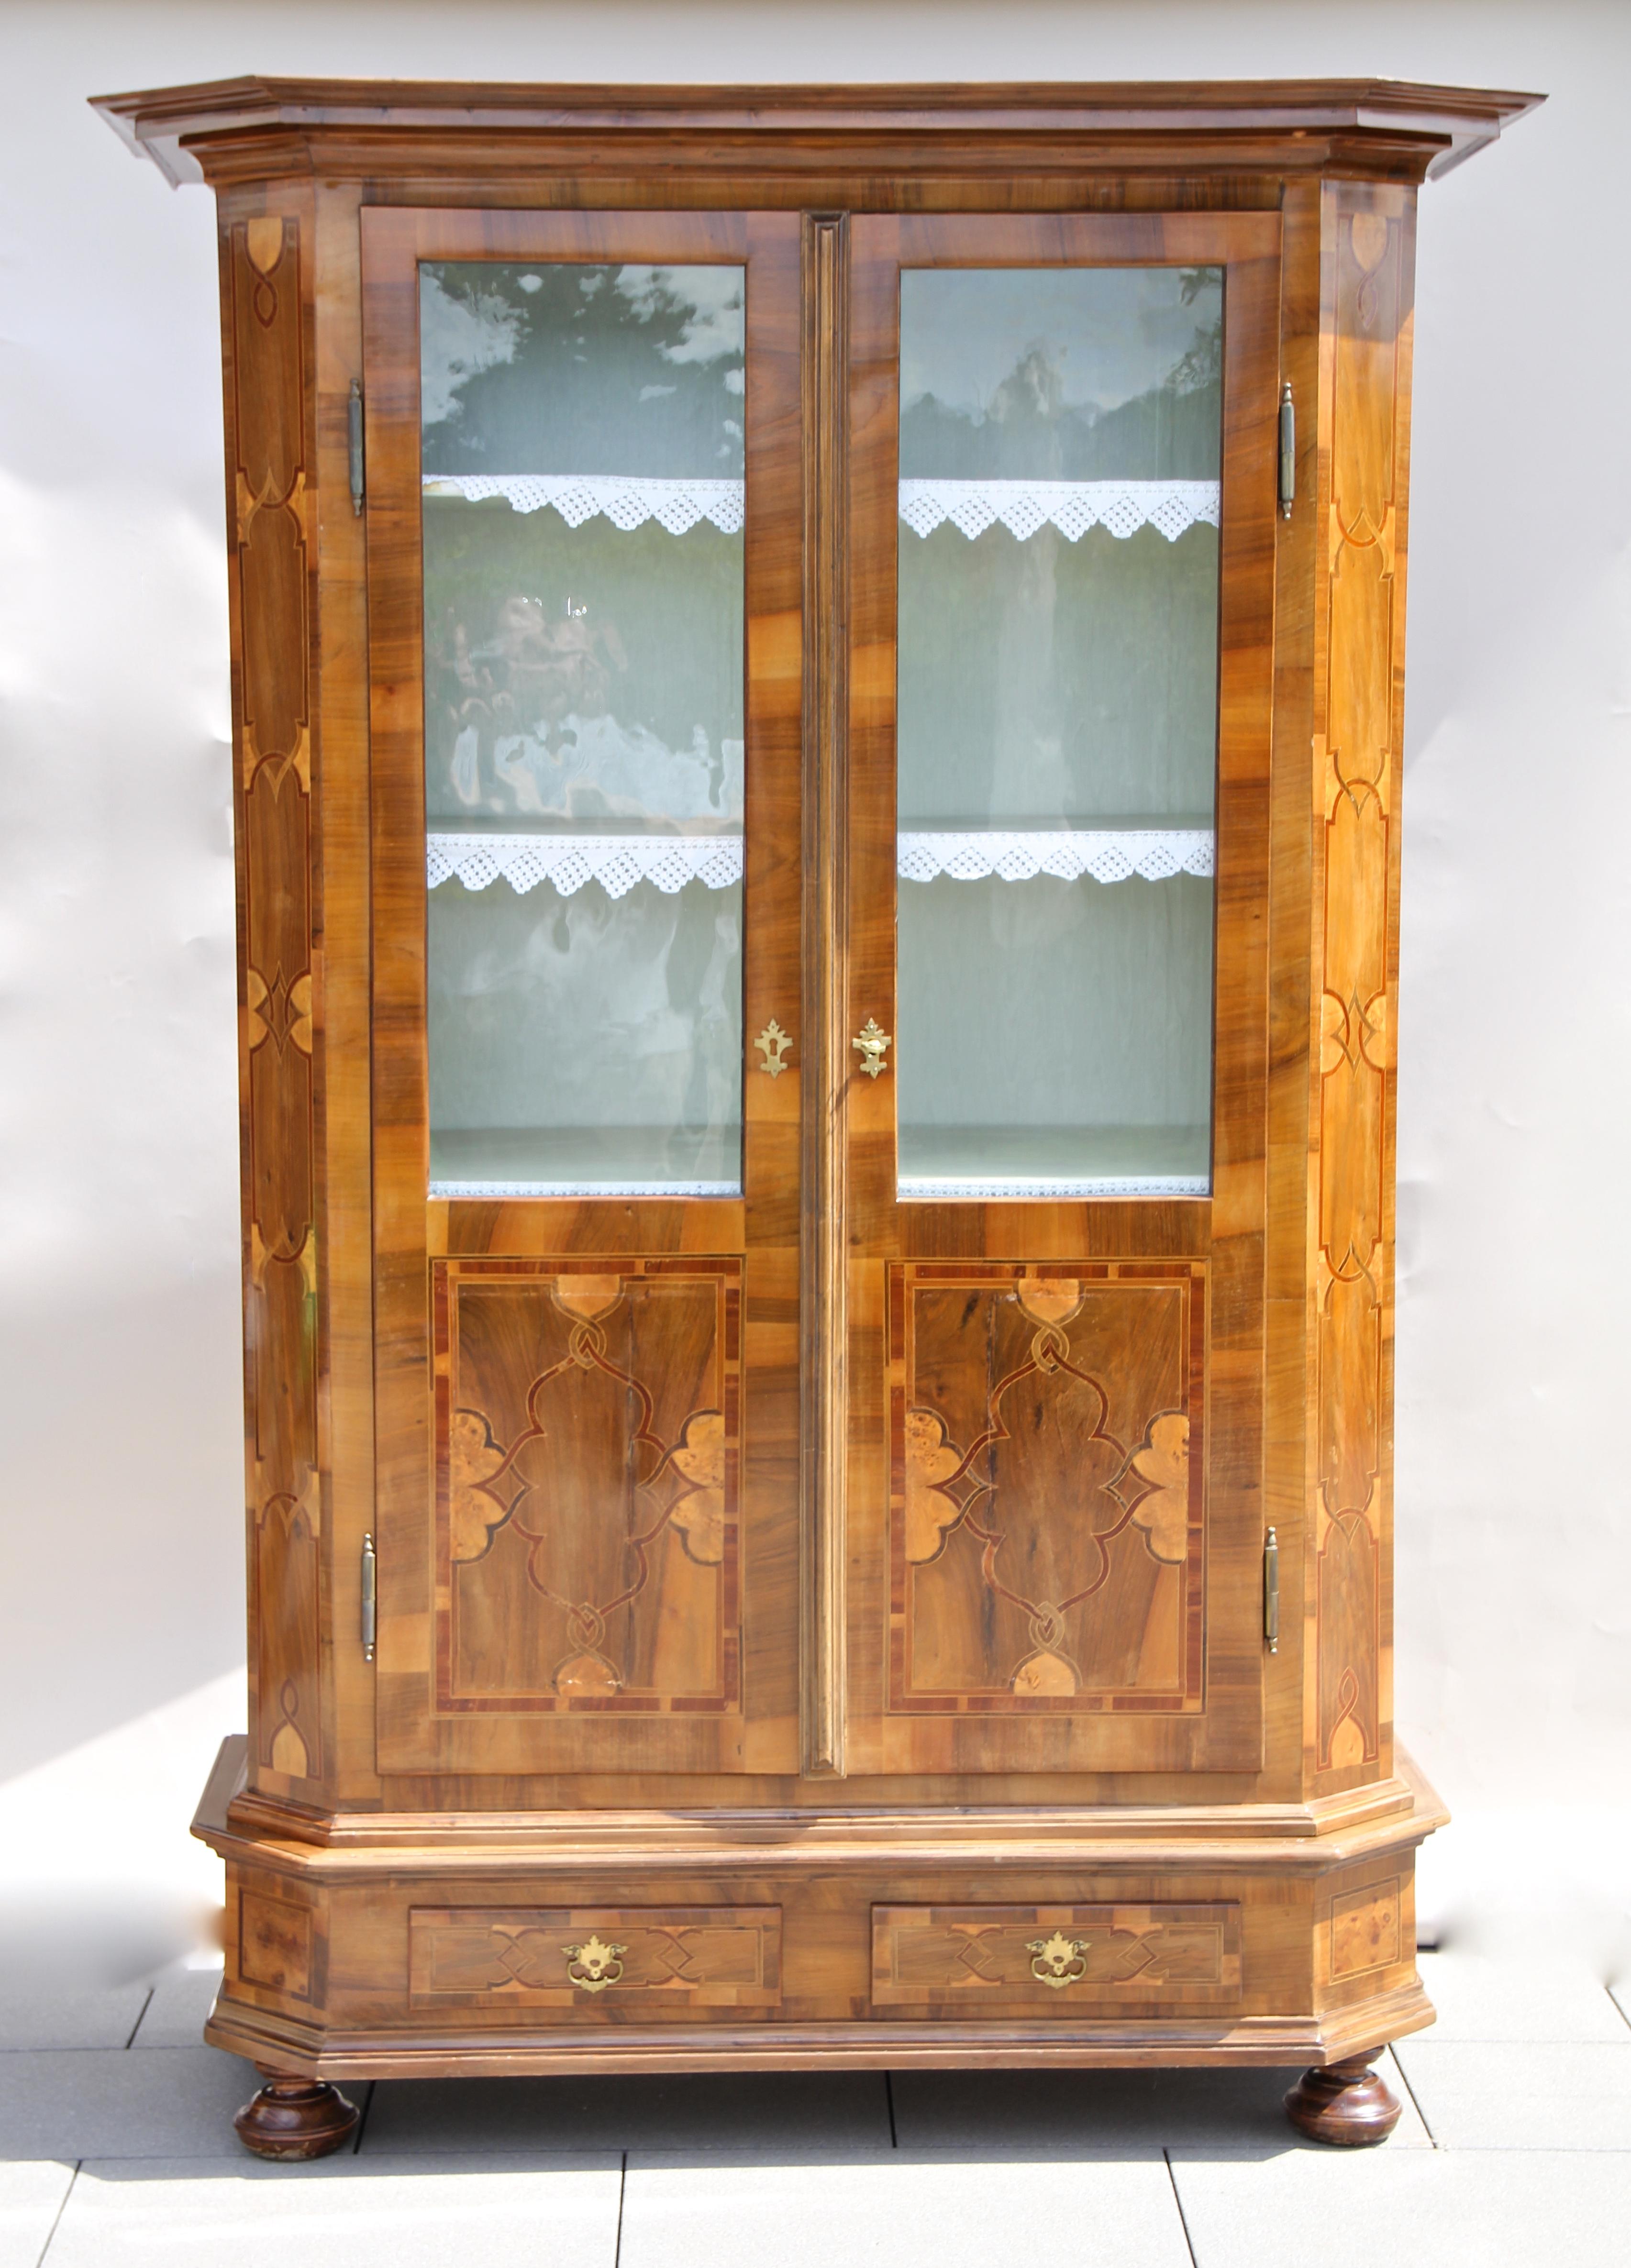 Fantastic 19th century Nutwood bookcase or cupboard with inlay works from the famous Baroque Revival period circa 1890 in Austria. The large elaborately handcrafted cabinet impresses with its outstanding marquetry works and provides two glass